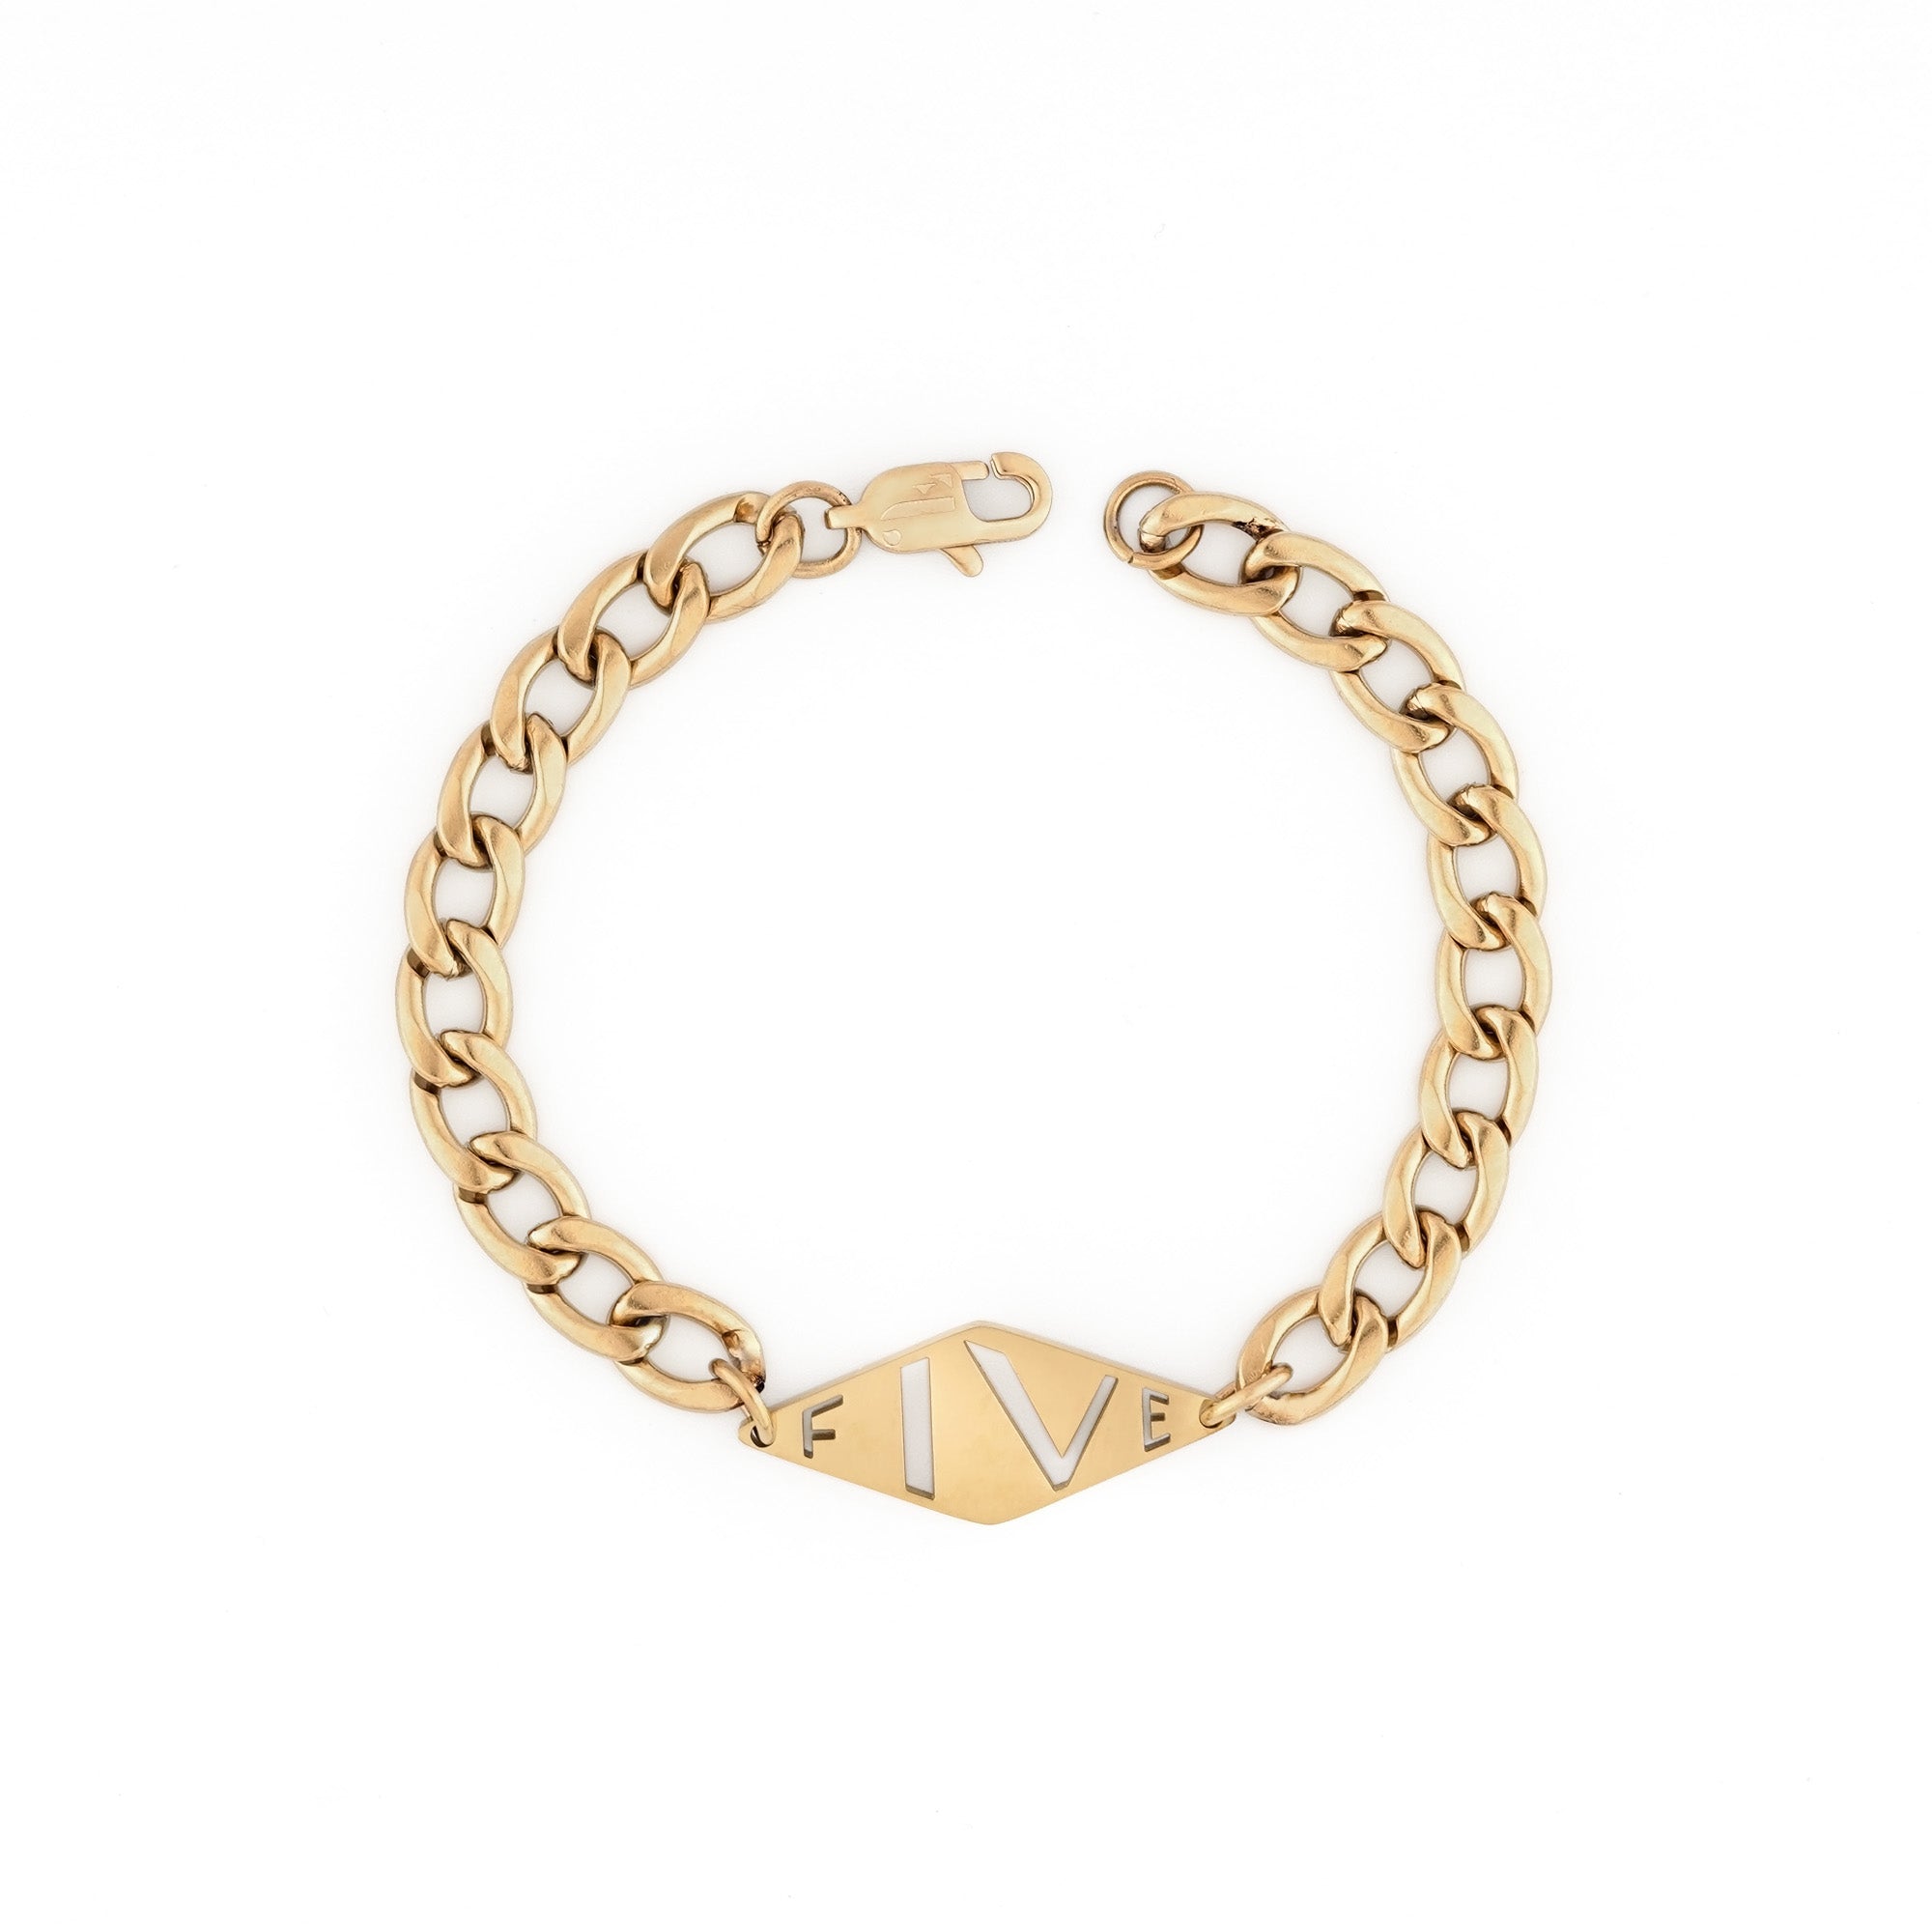 Dal bracelet by Five Jwlry for women, uniquely designed in Montreal, showcasing a wide woven Cuban link chain in 14k gold color, adorned with the brand's signature lozenge logo tag